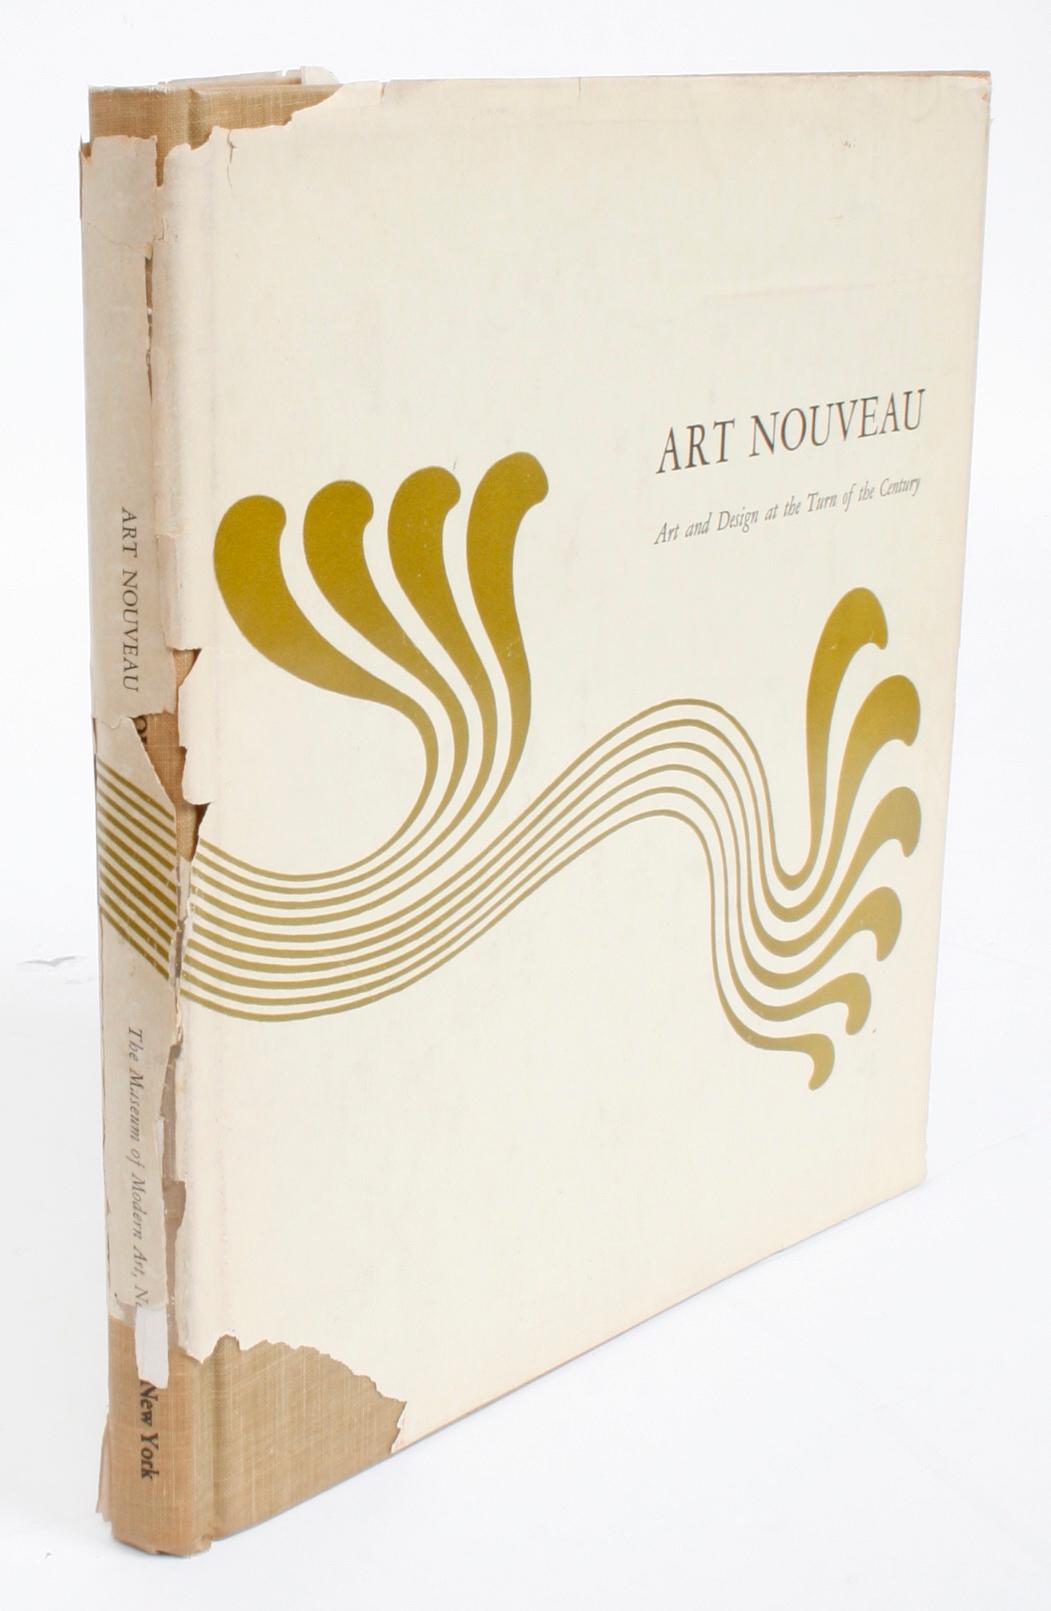 Art Nouveau, Art Design at the Turn of the Century, Firstst Edition 14